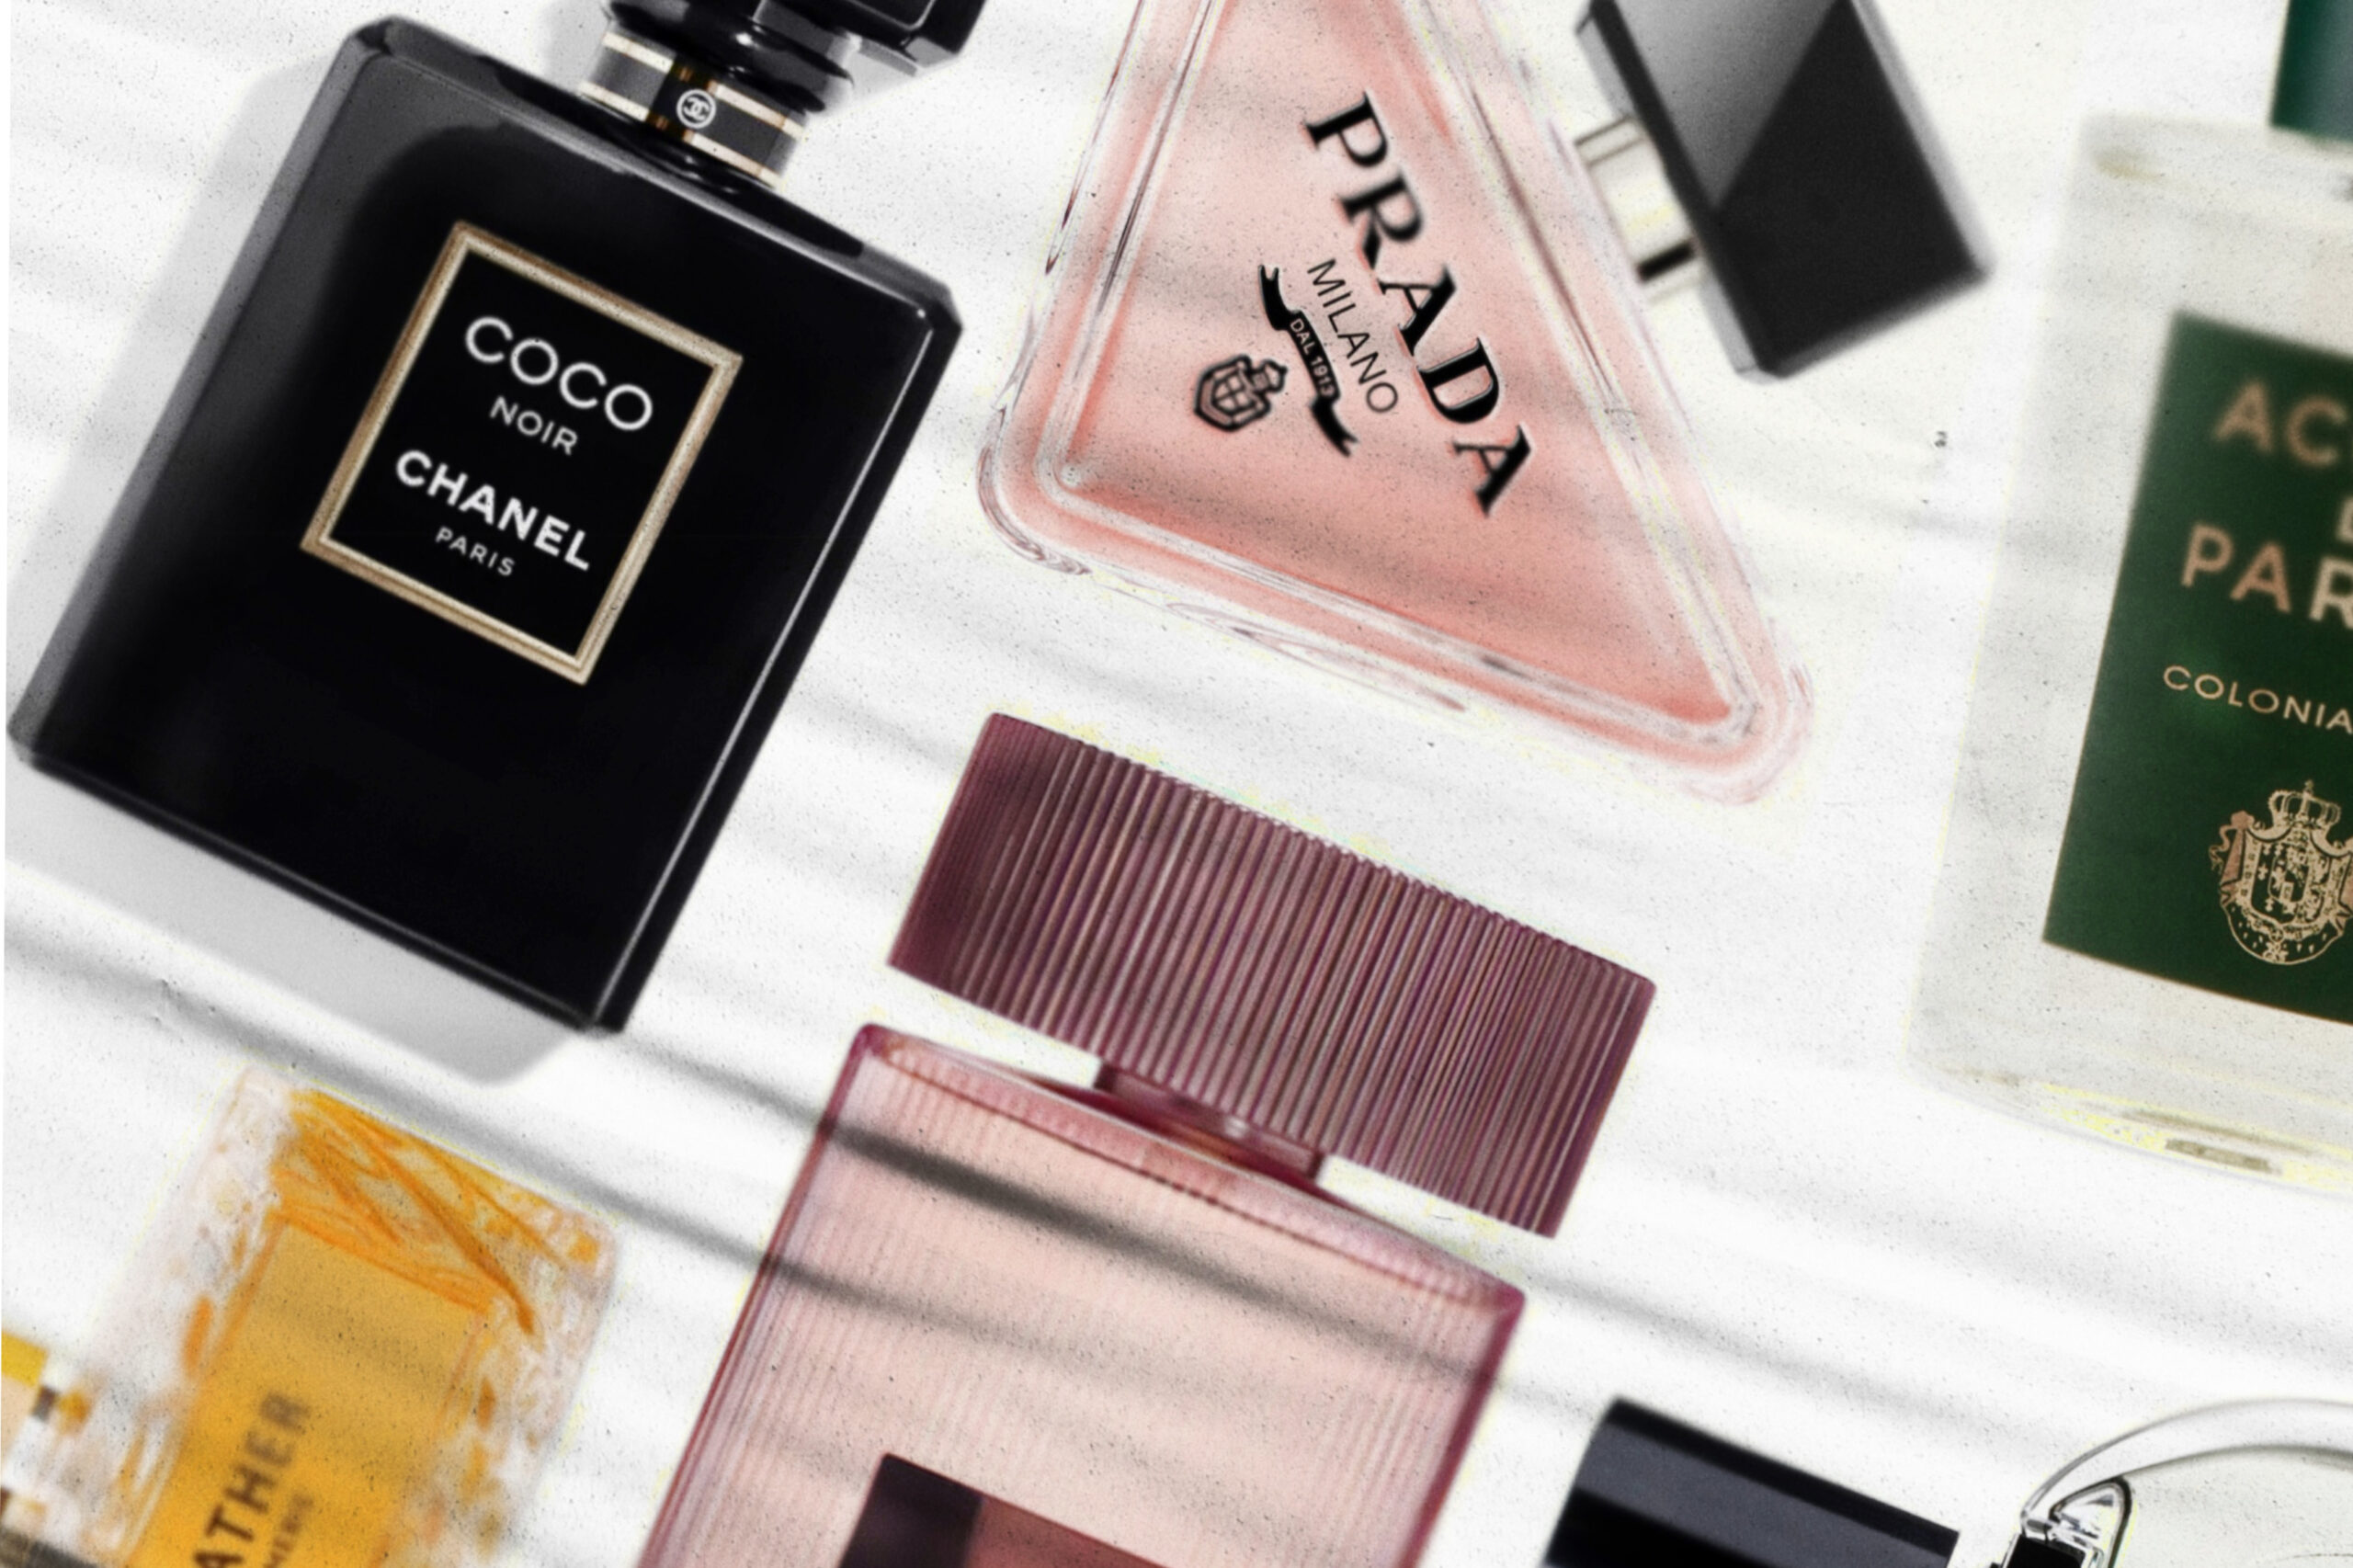 THESE ARE THE LUXURY FRAGRANCES YOU NEED RIGHT NOW